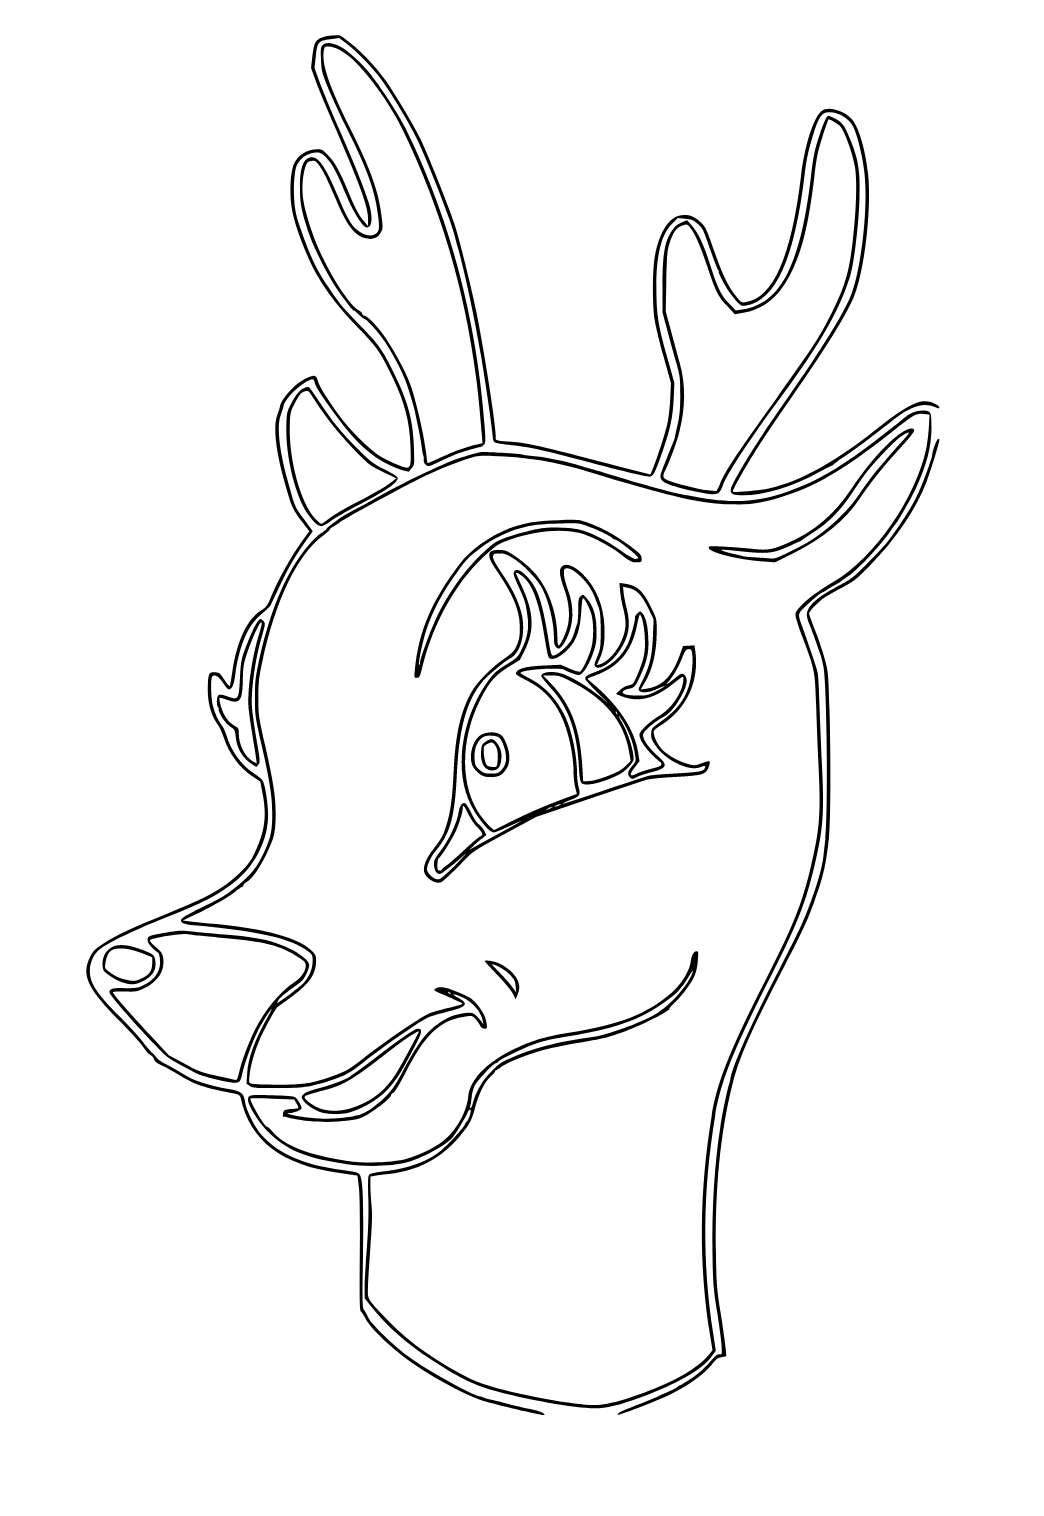 Free printable deer head coloring page for adults and kids